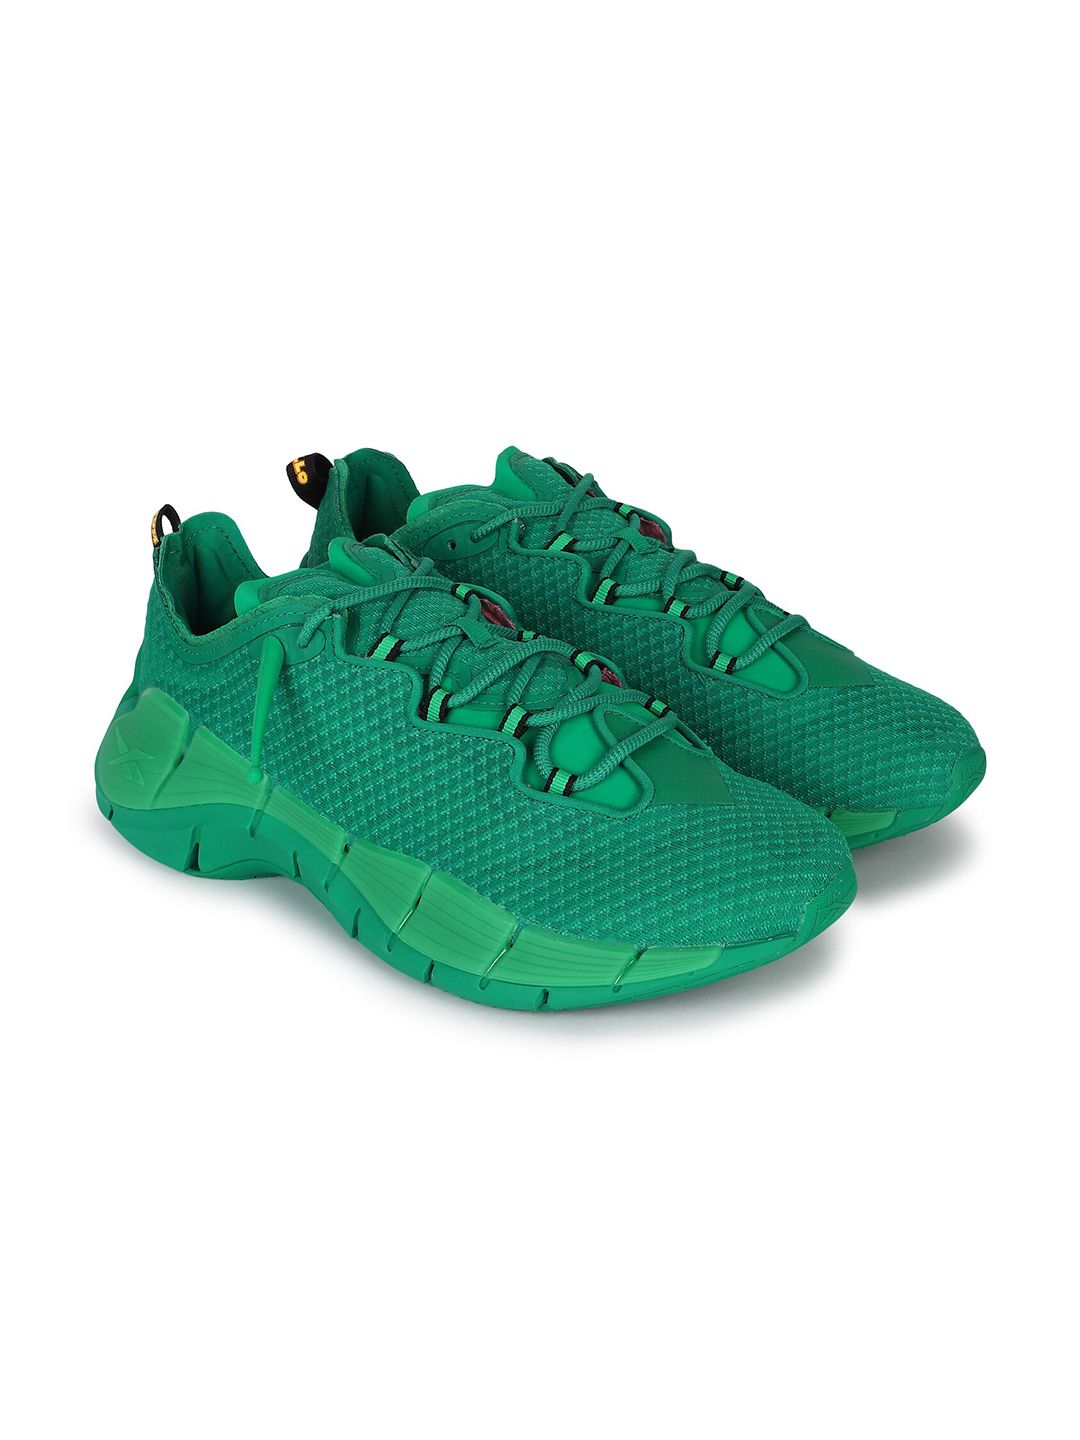 Reebok Unisex Green Sports Shoes Price in India